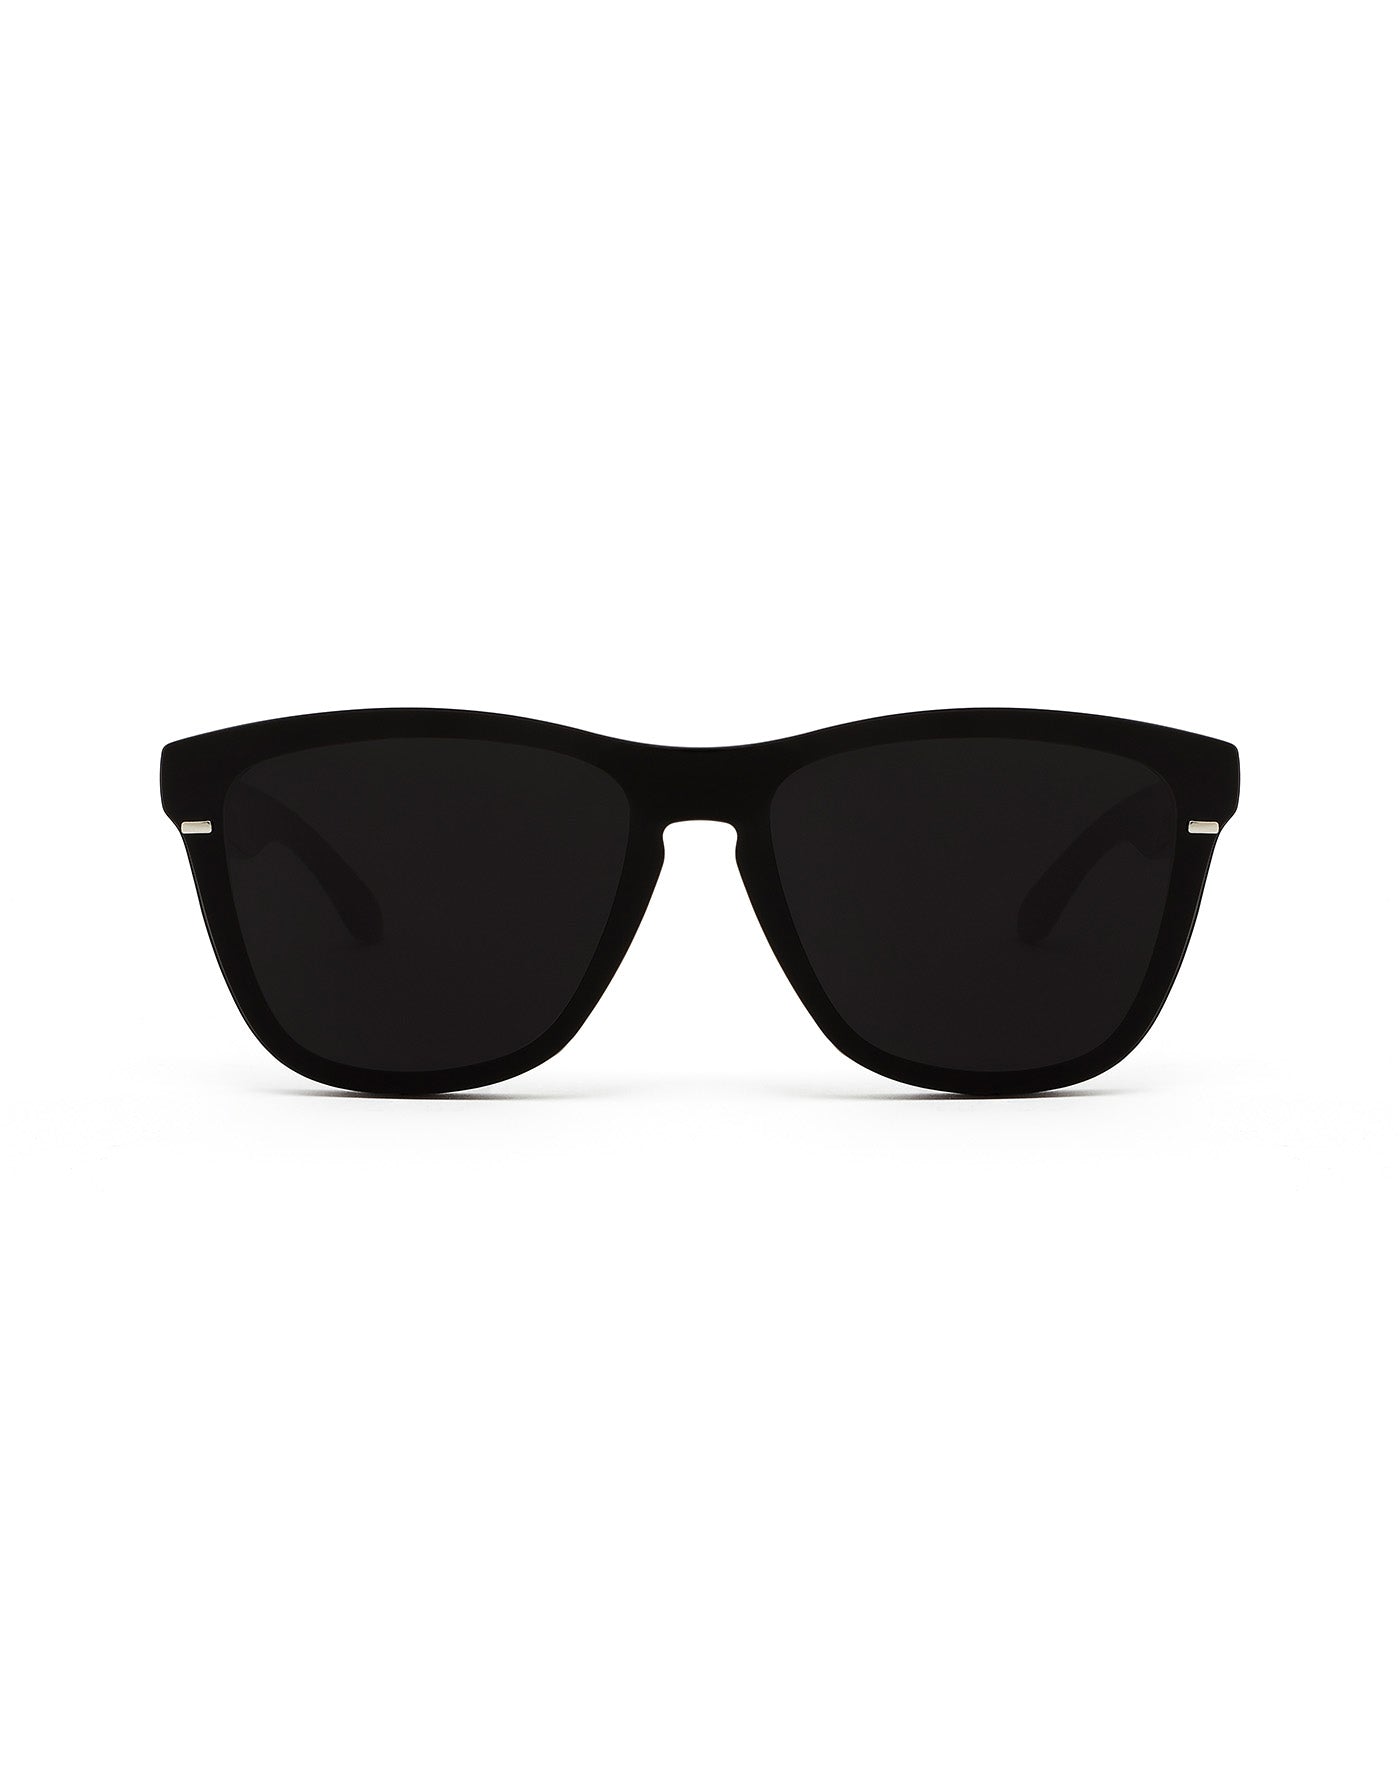 HAWKERS - ONE VENM HYBRID Dark For Men and Women UV400